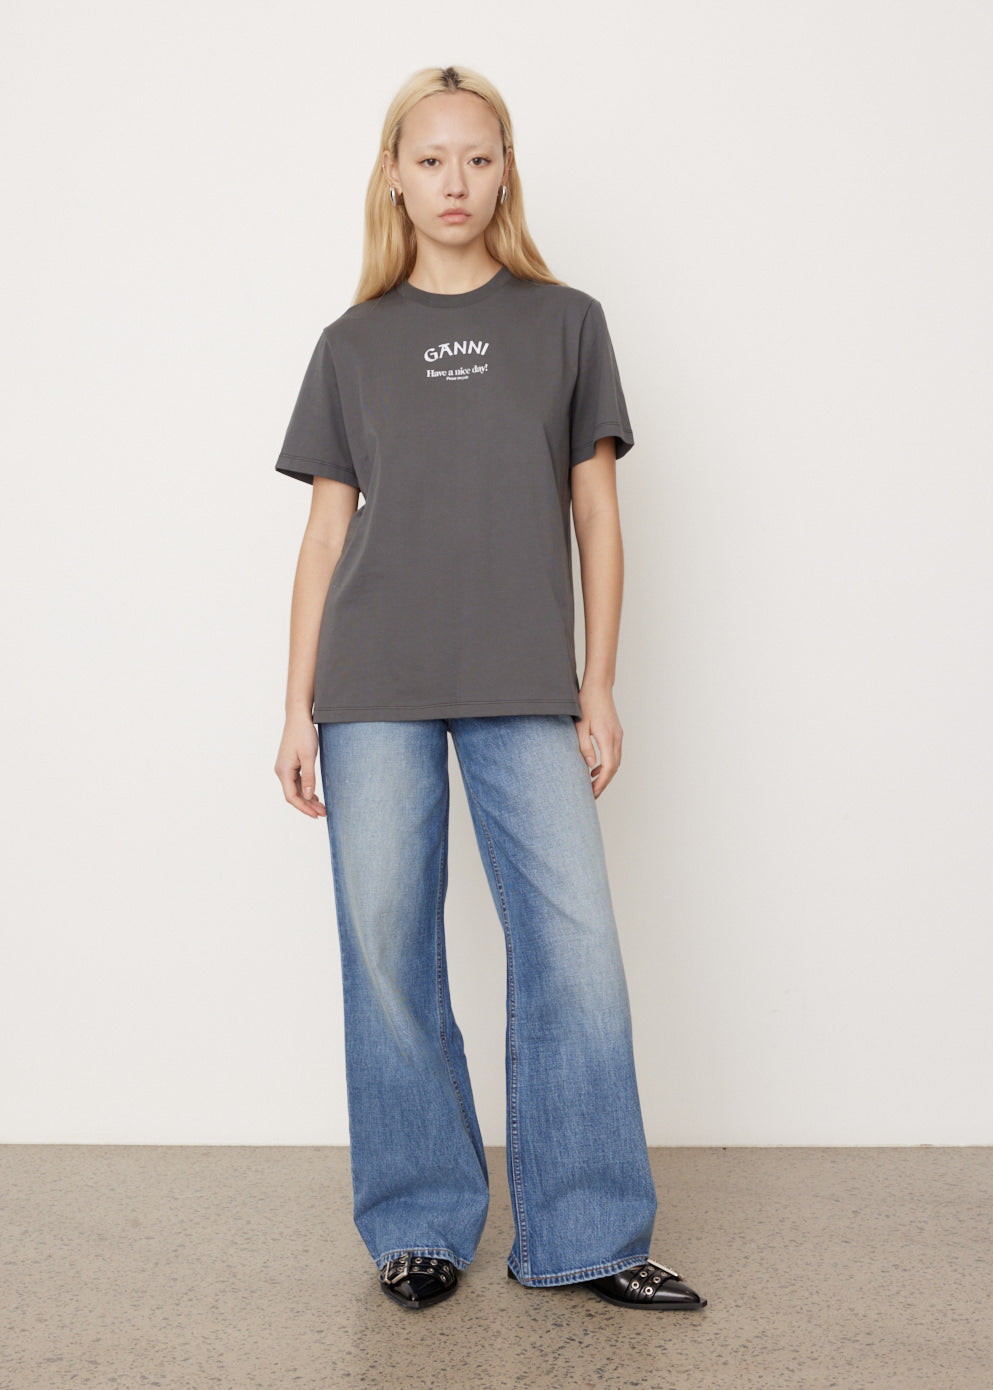 THE CLASSIC T-SHIRT COMPANY'S T-SHIRT STYLE GUIDE FOR WOMEN